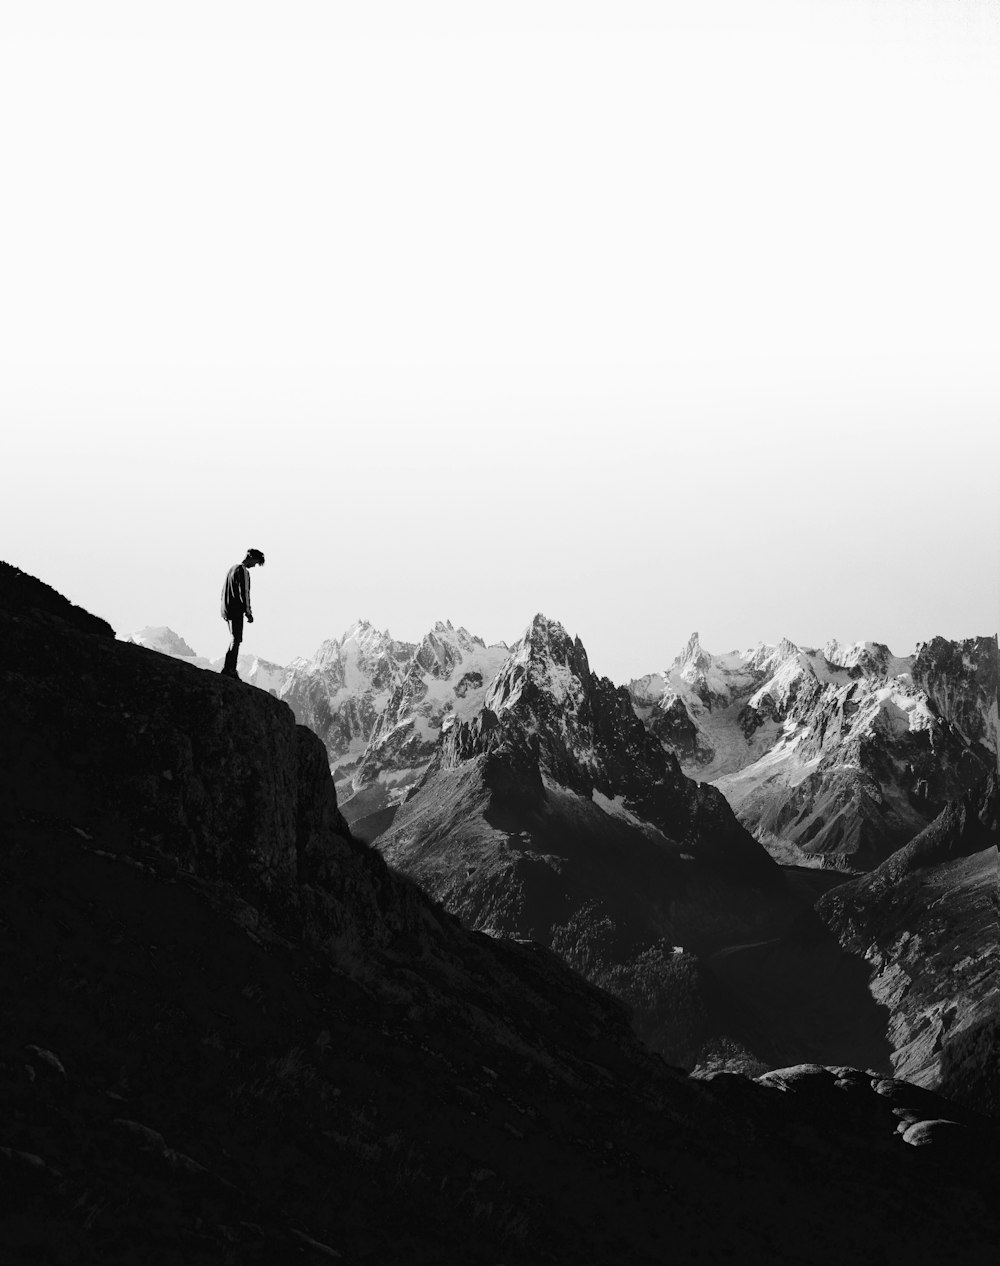 silhouette of person standing on cliff in front of snowed mountains